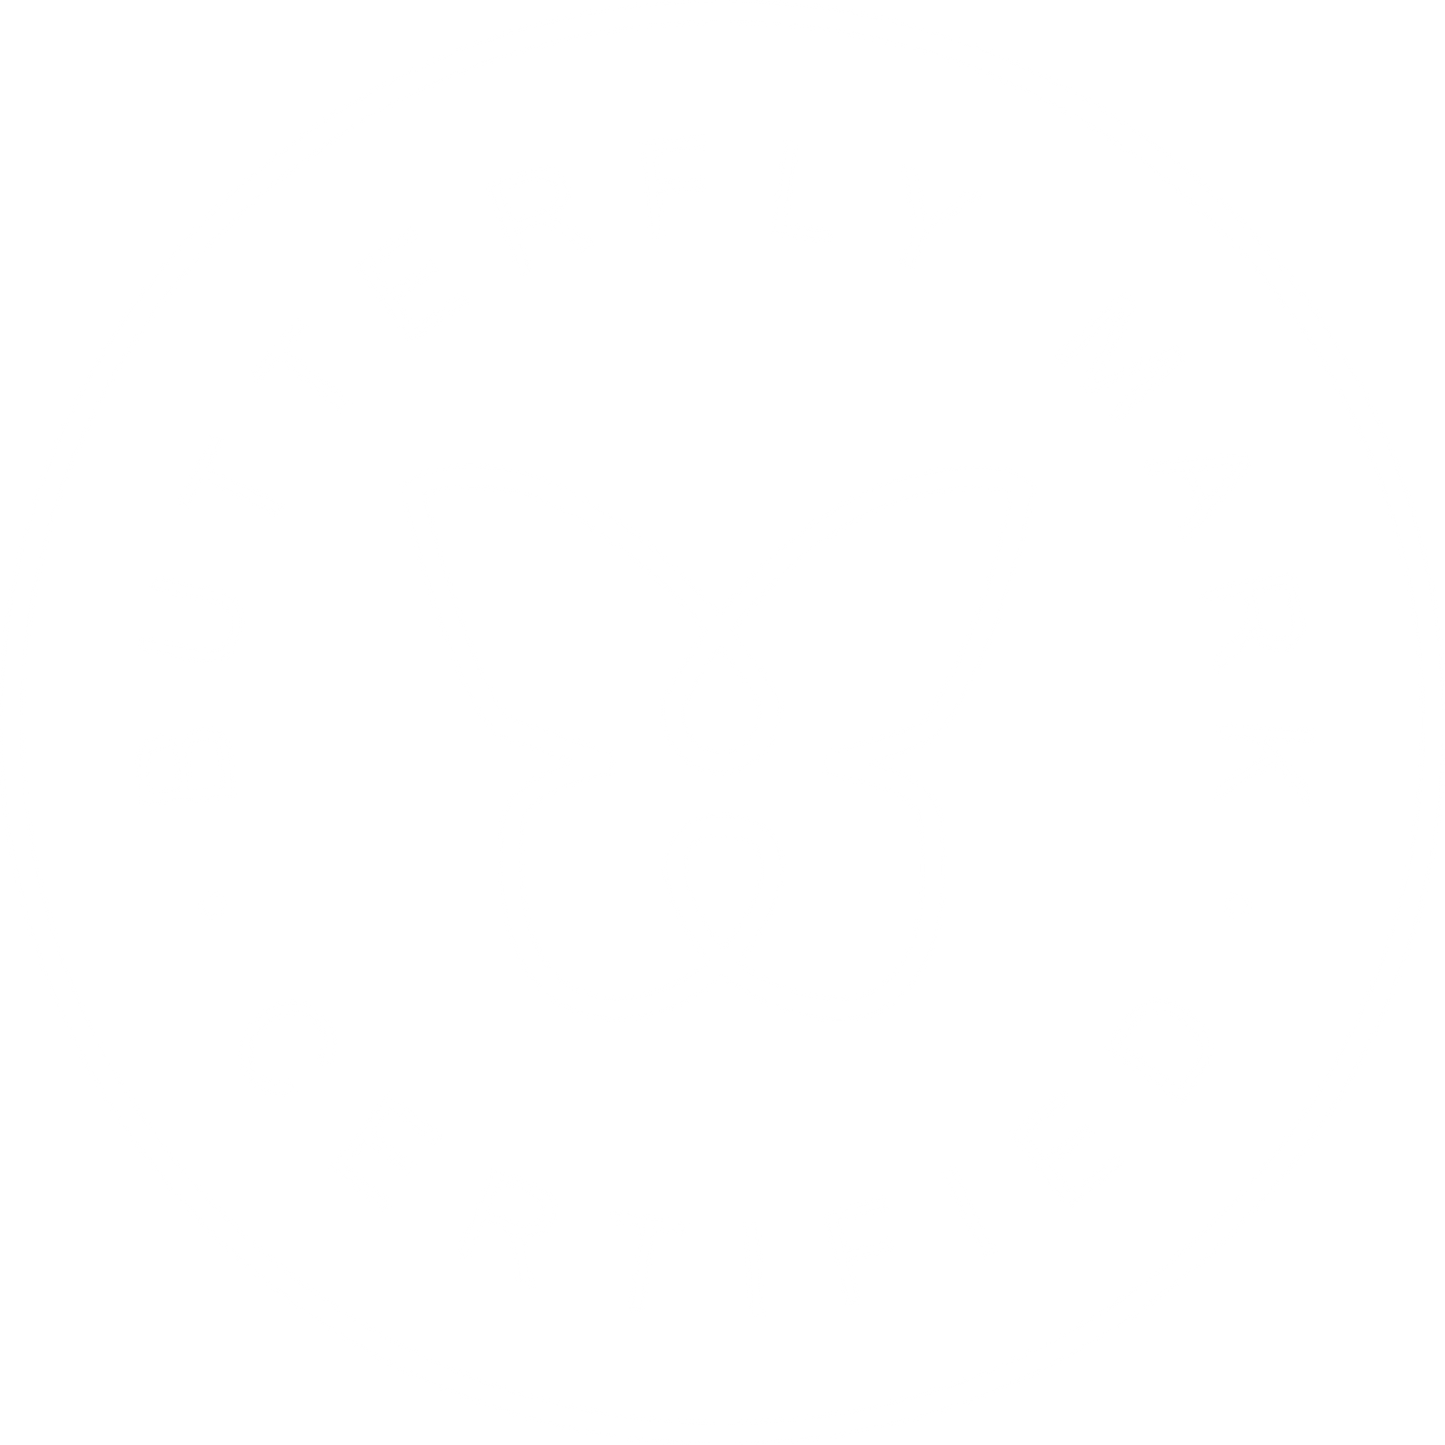 The butterfly mark logo. The Butterfly Mark is an independent accreditation mark that identifies the luxury brands that meet the highest standards of verified innovation and environmental performance.